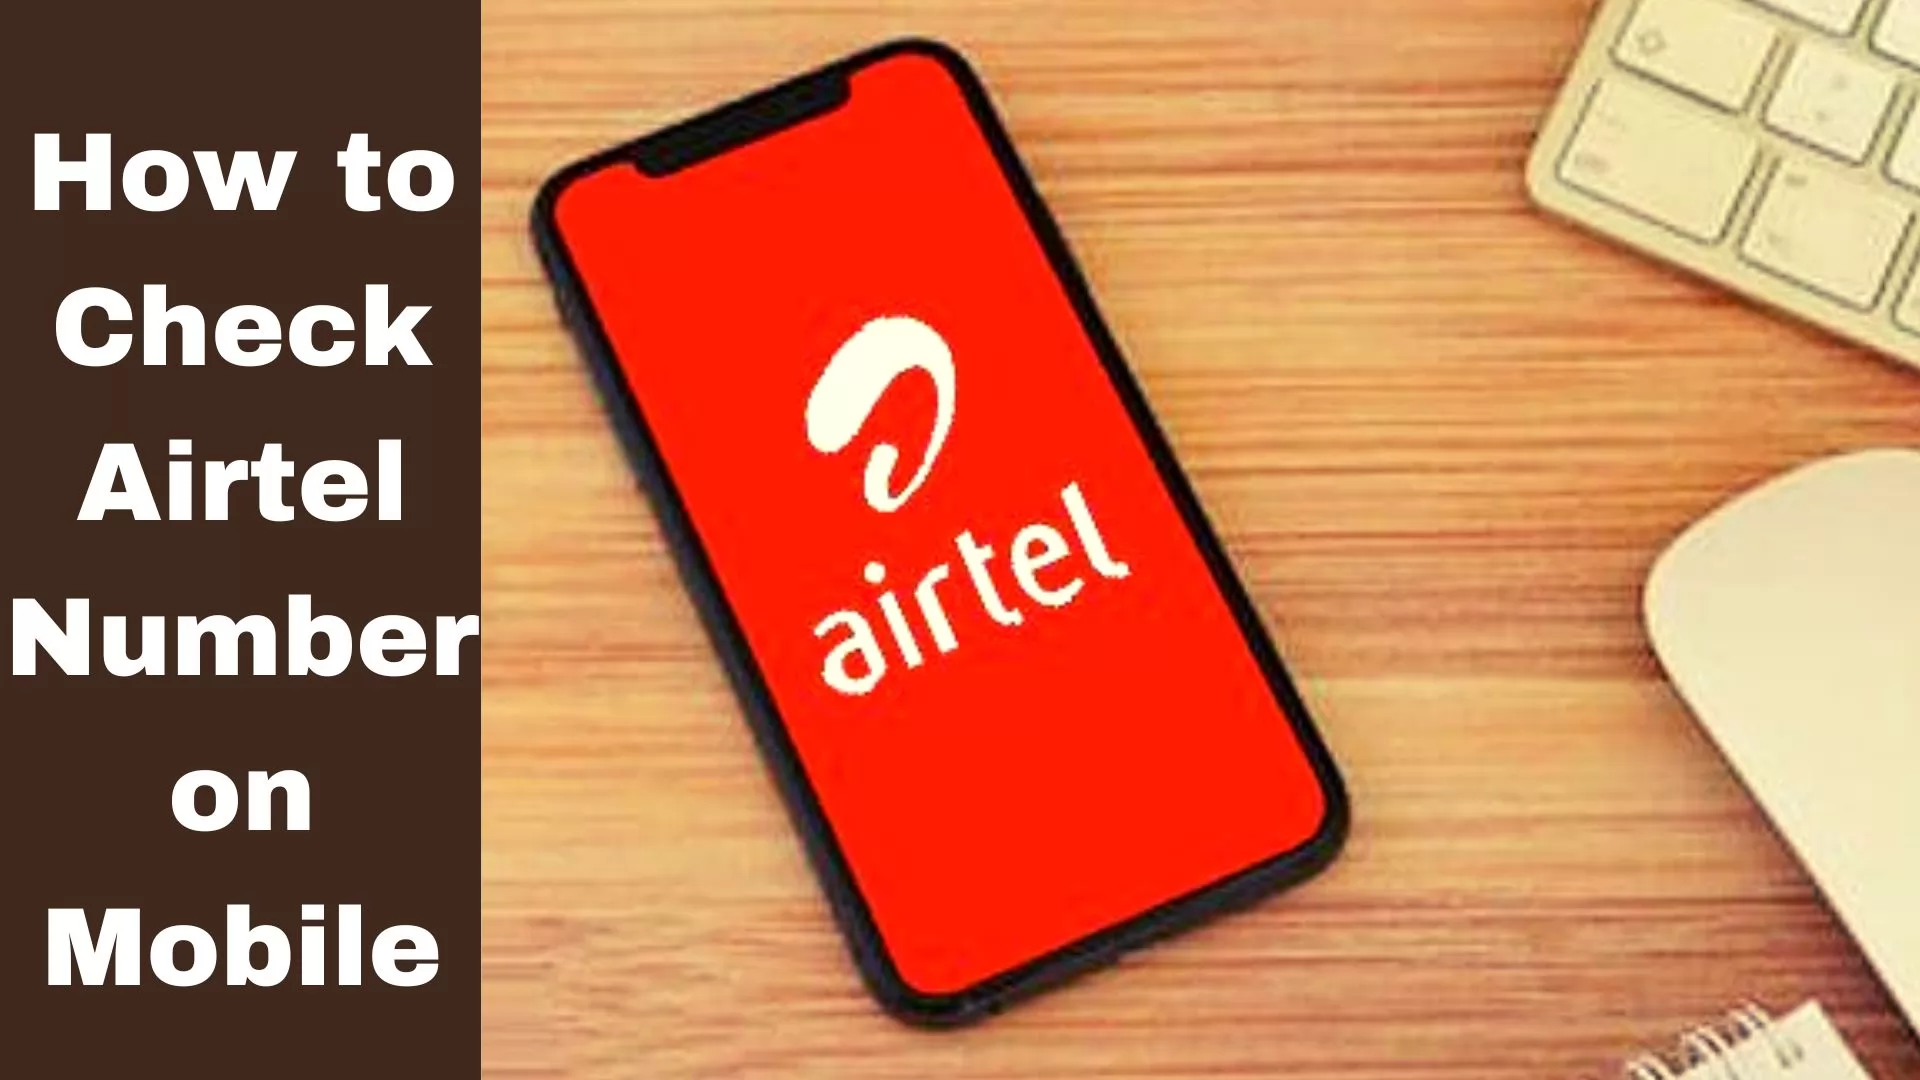 How to Check Airtel Number in Mobile?